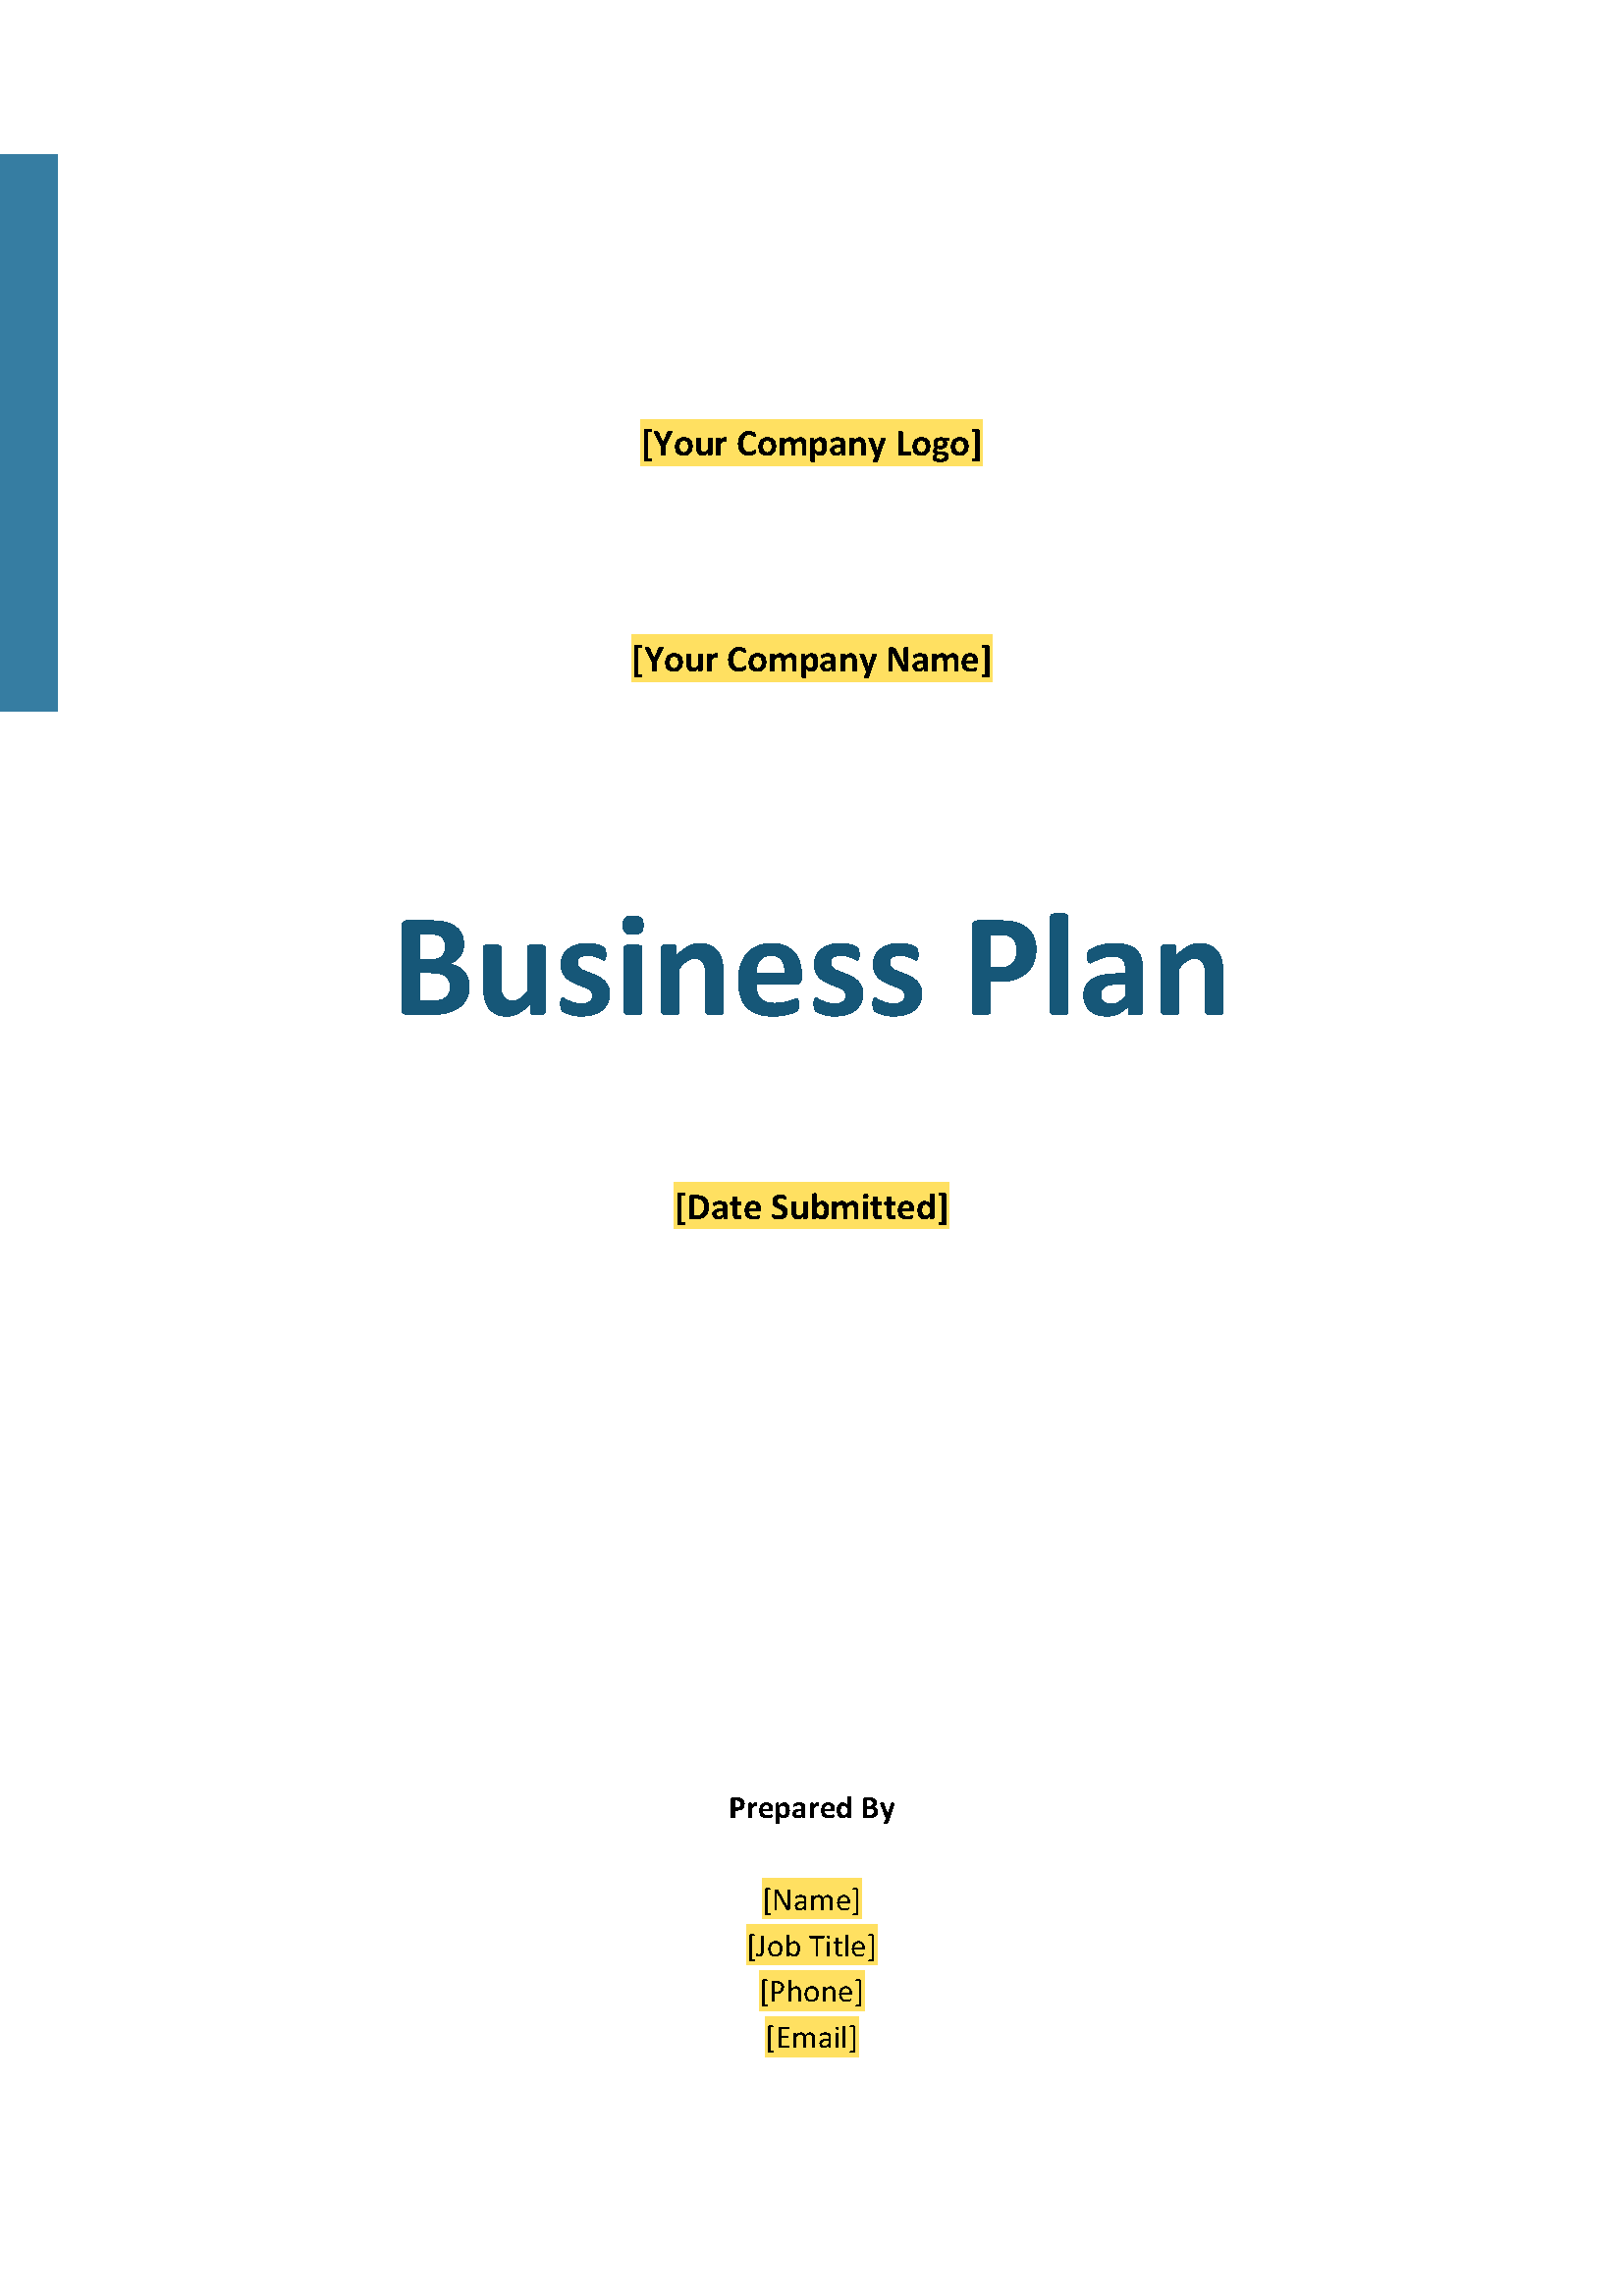 22 - IT Consulting Business Plan Template